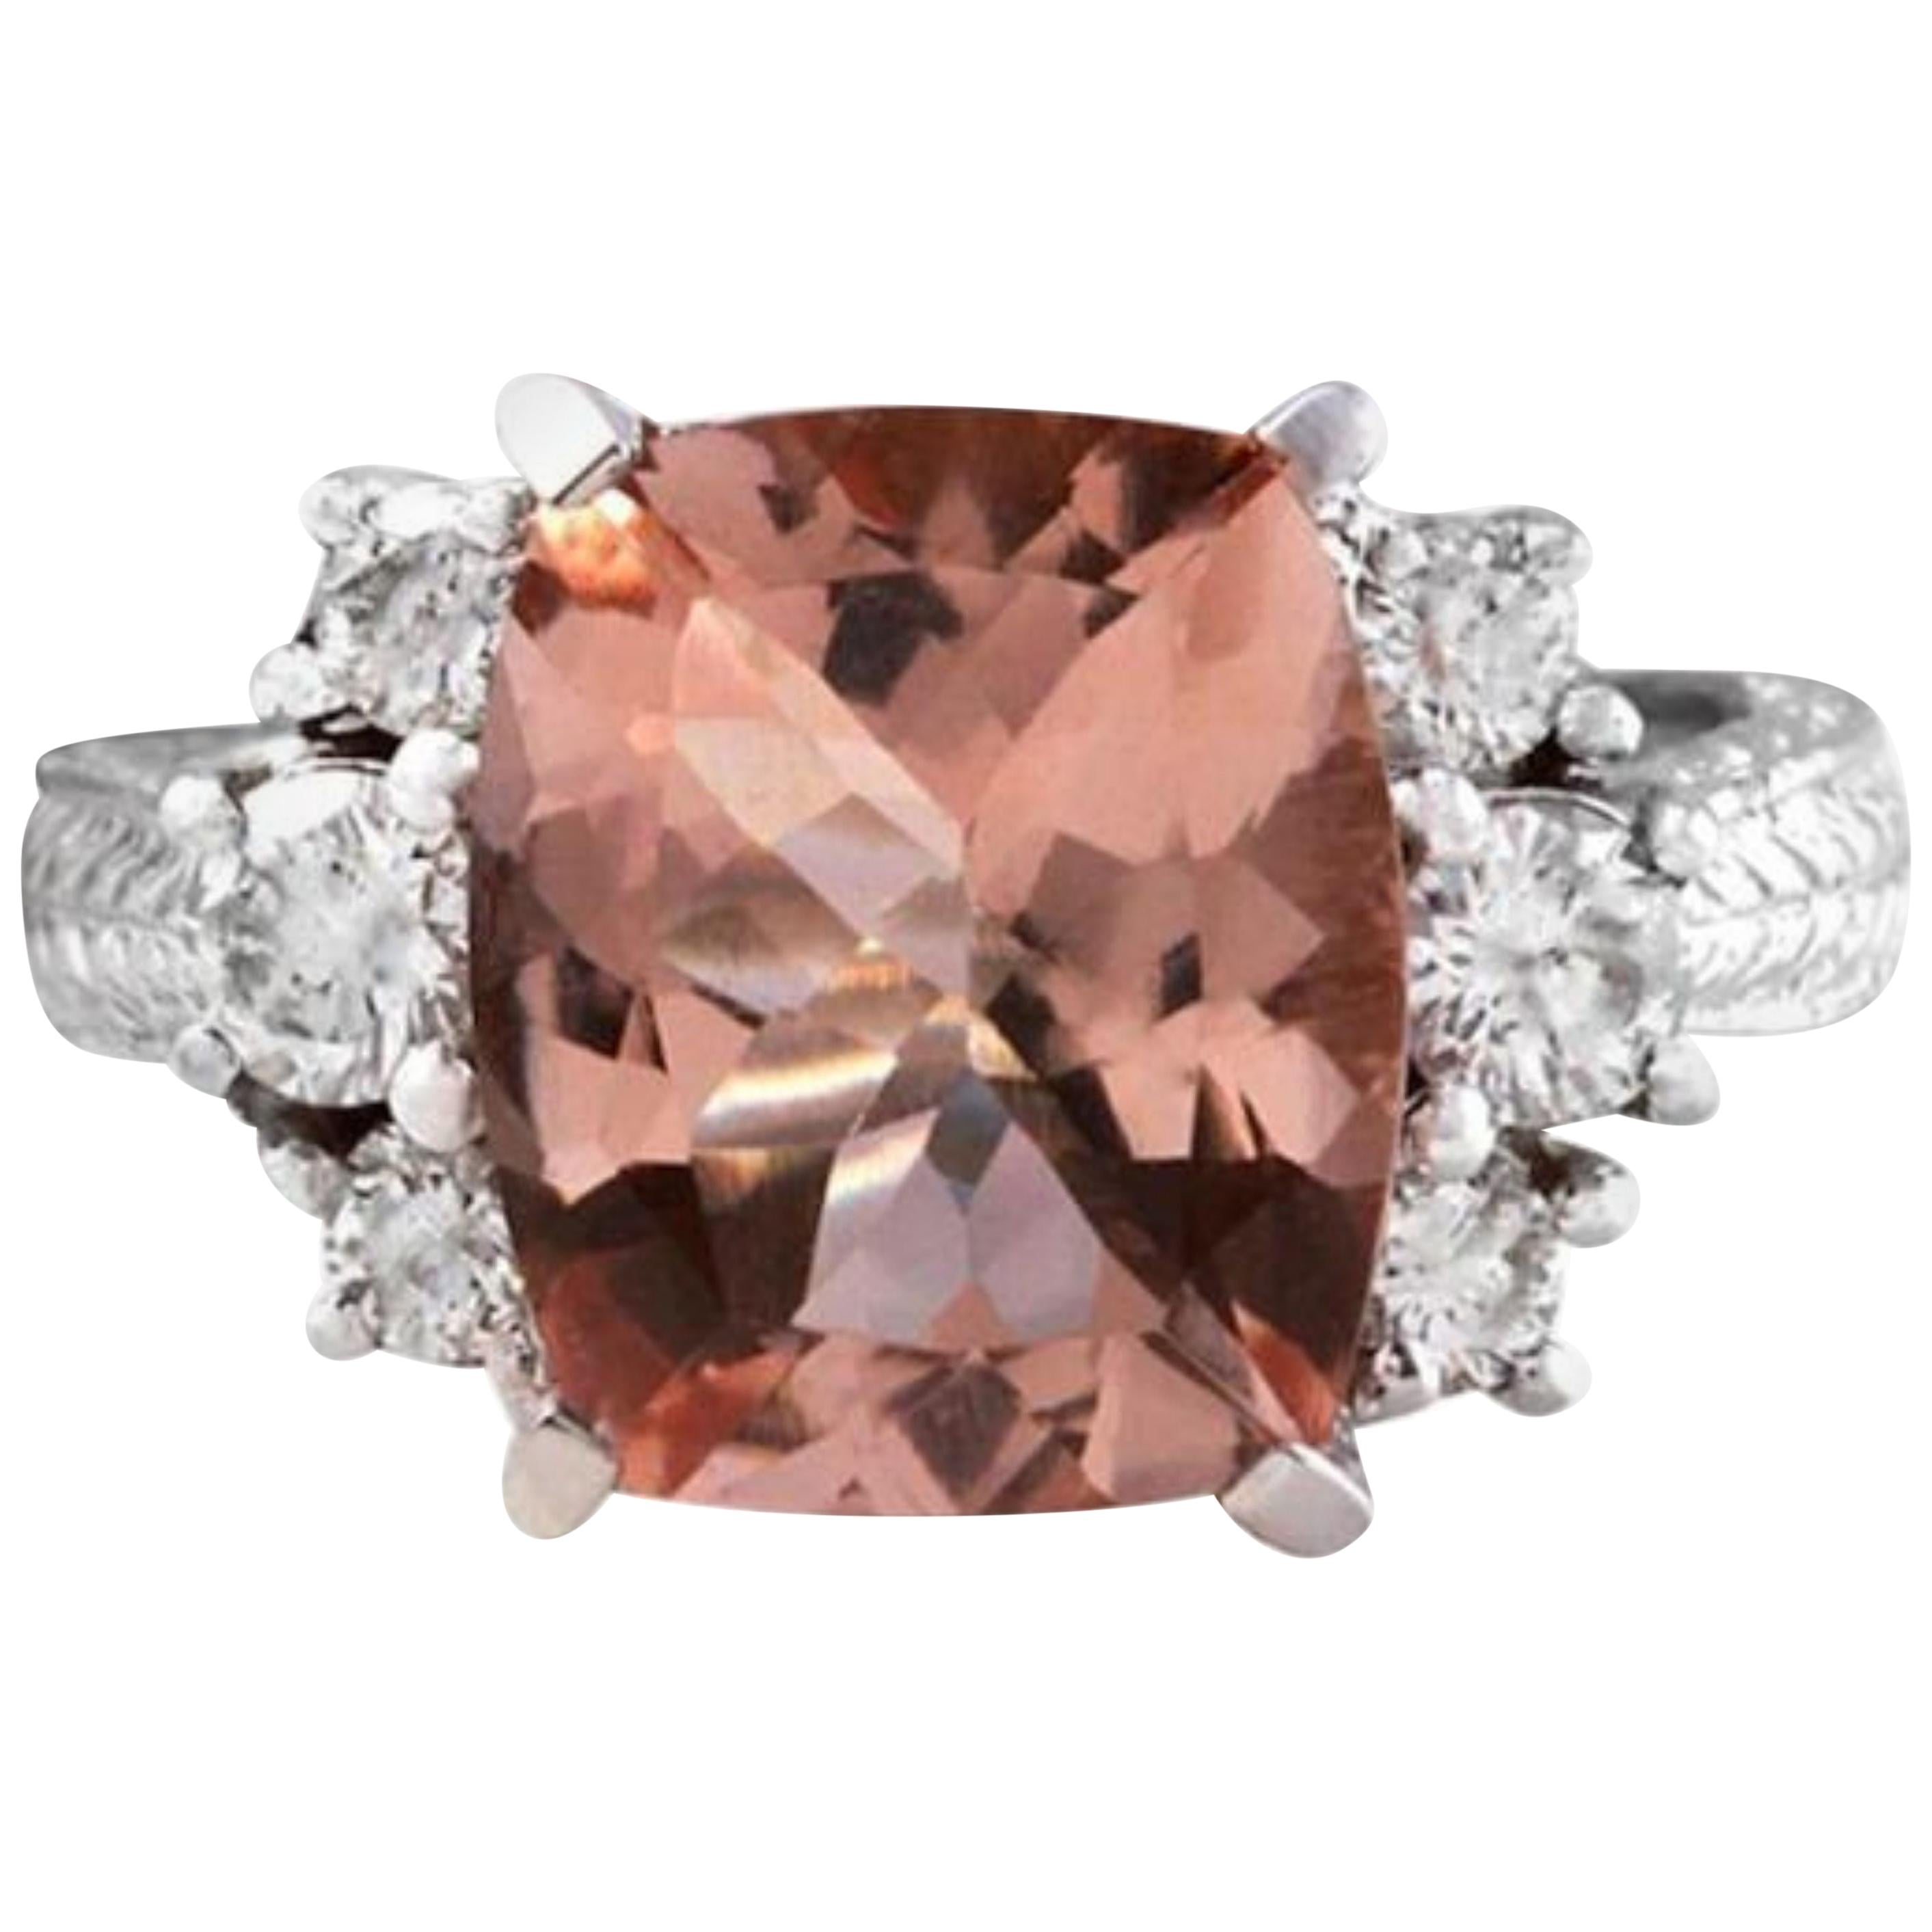 6.65 Carat Exquisite Natural Morganite and Diamond 14 Karat Solid Gold Ring For Sale